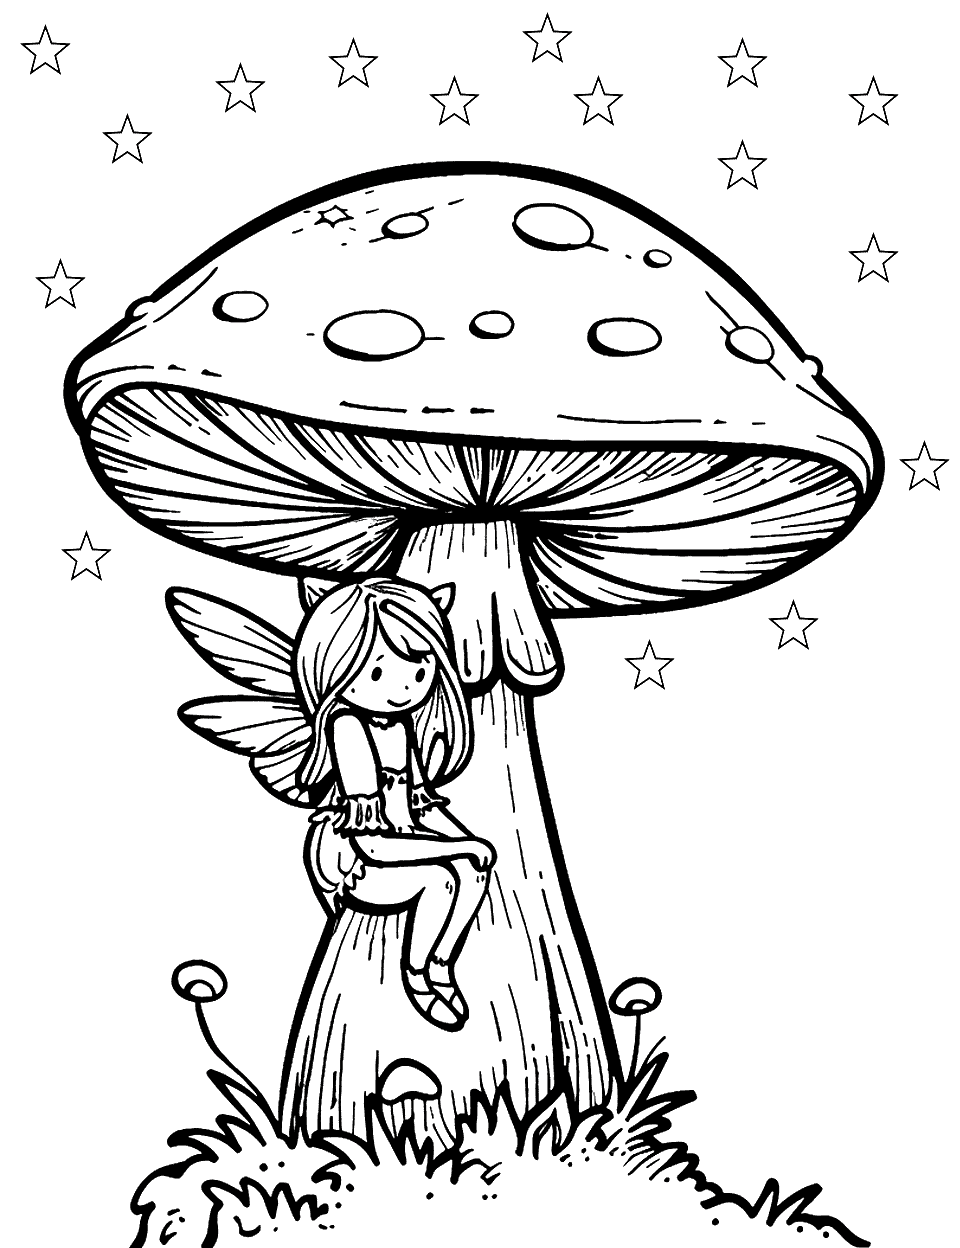 Fairy Sitting on a Mushroom Coloring Page - A small fairy rests on a mushroom cap, with twinkling stars above.